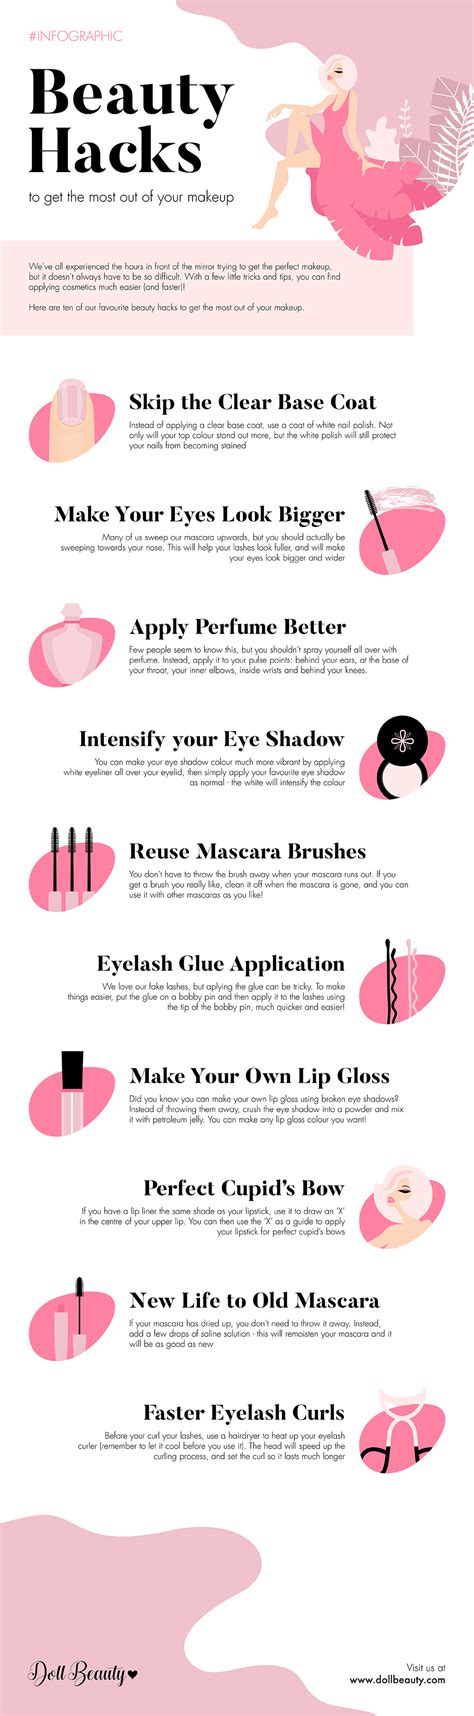 Beauty Hacks To Get The Most Out Of Your Makeup Visually